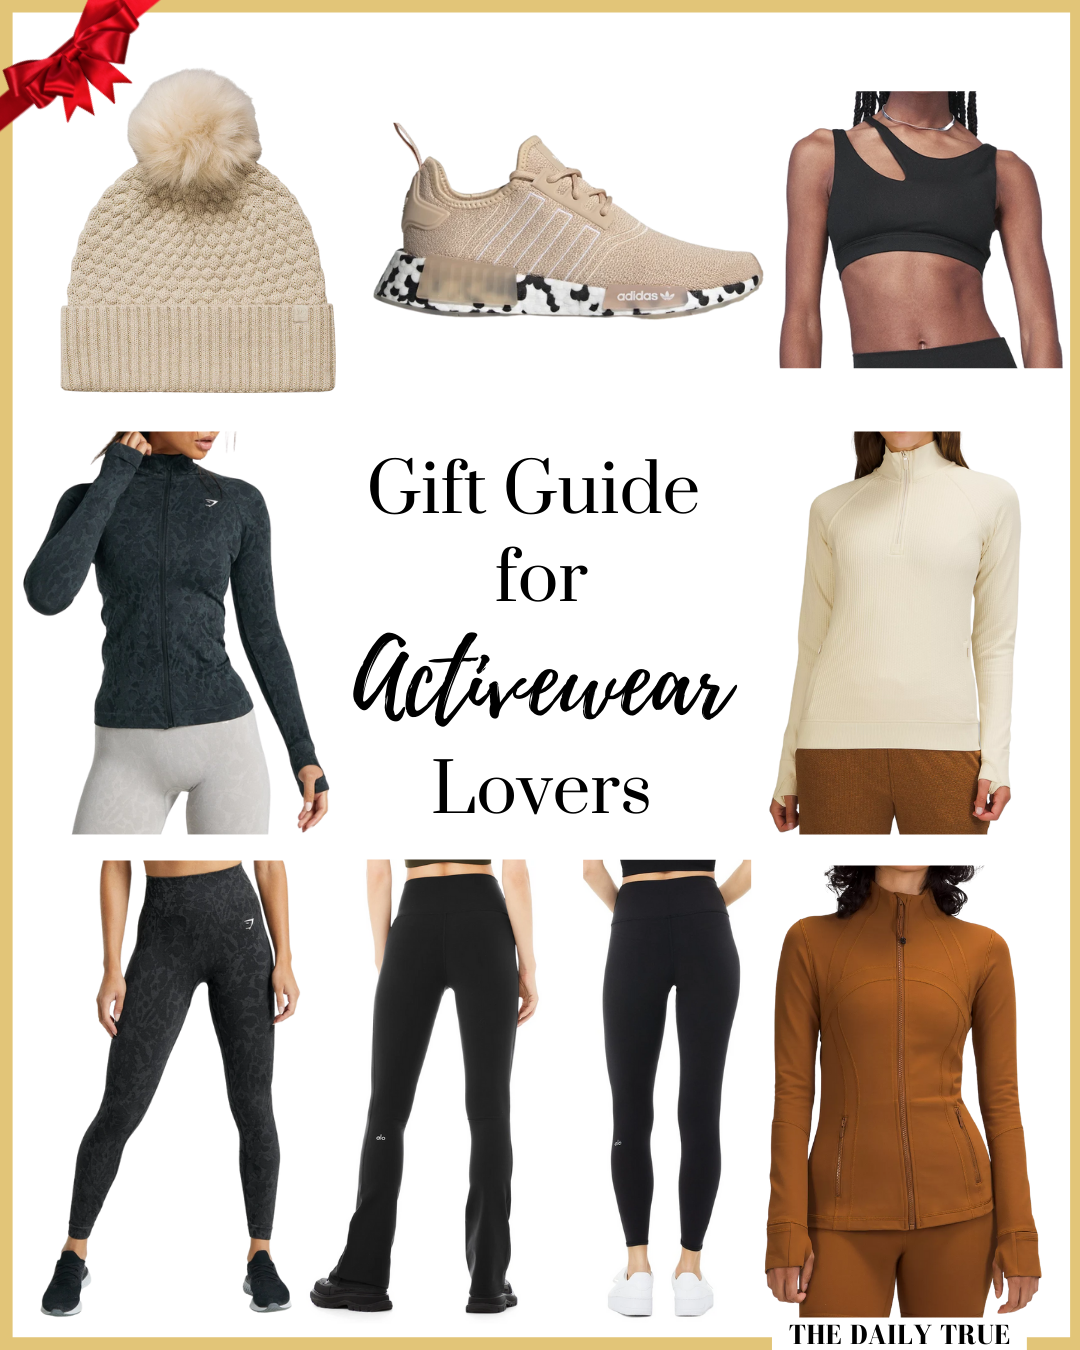 Gifts for Activewear Lovers